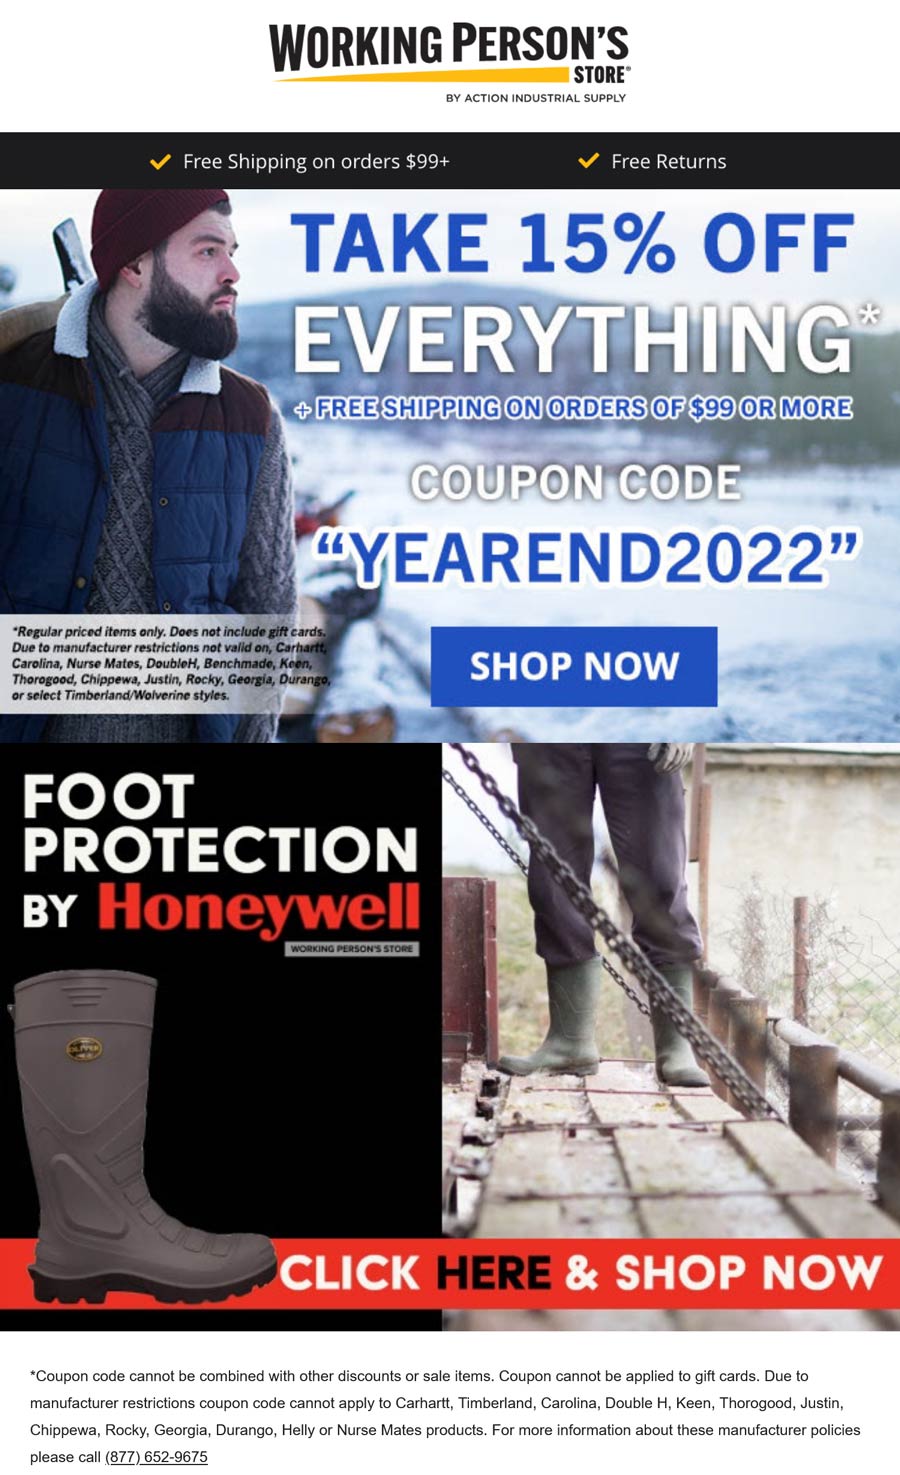 Working Persons Store stores Coupon  15% off everything at Working Persons Store via promo code YEAREND2022 #workingpersonsstore 